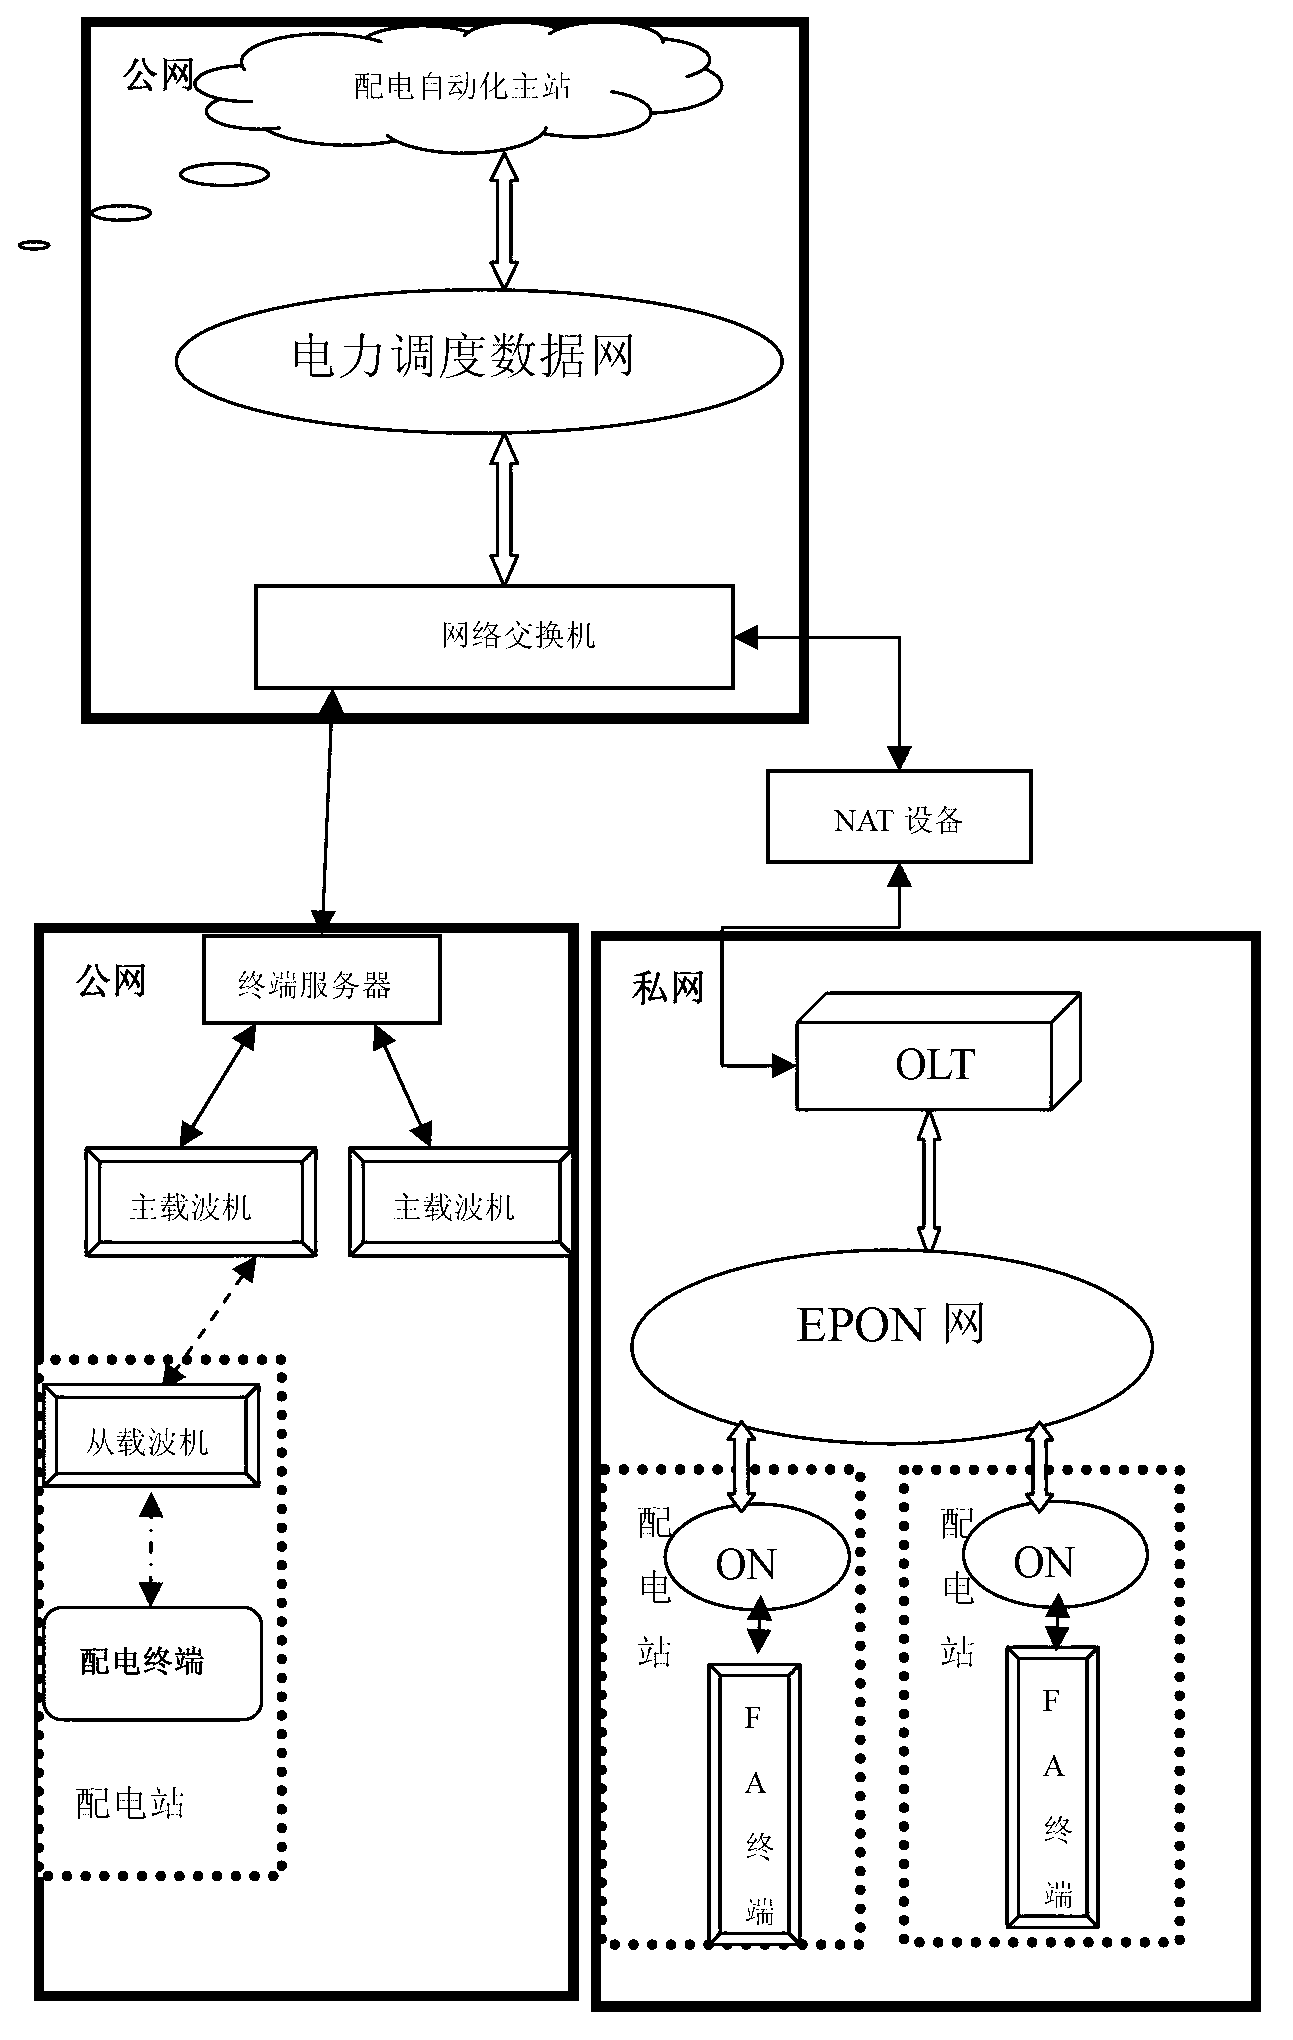 Method for connecting power distribution terminal into scheduling data network through NAT (Network Address Translation) manner